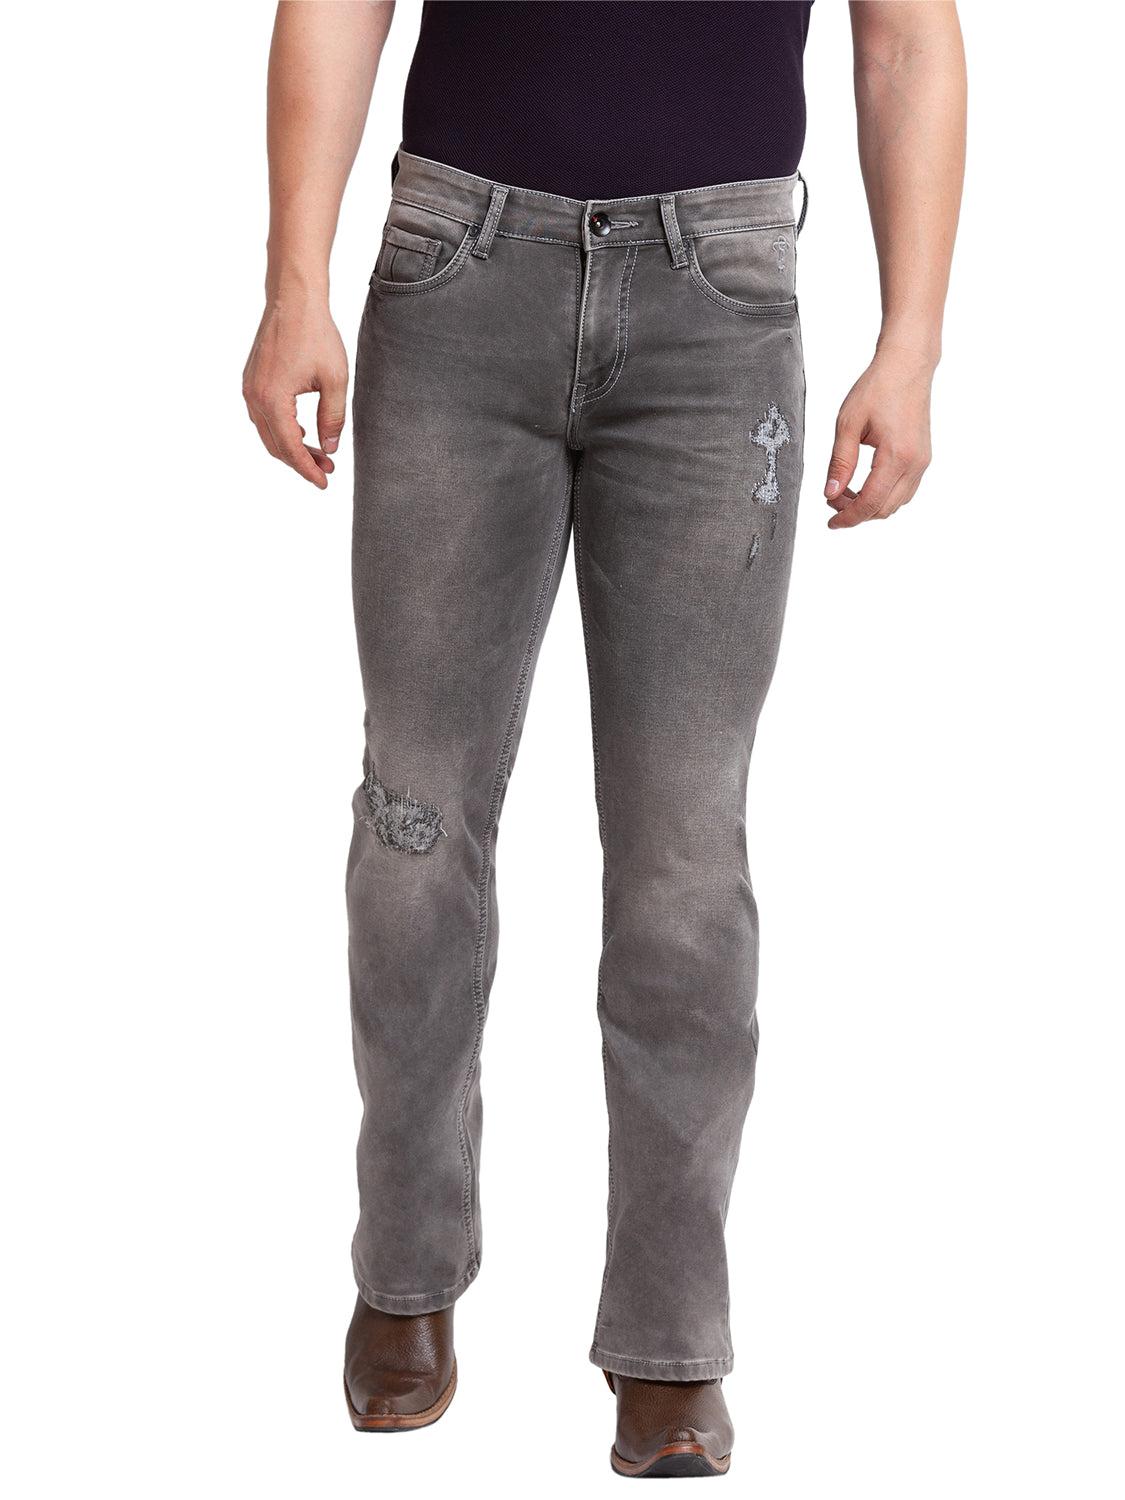 Light Grey Distressed Bootcut Jeans for Men